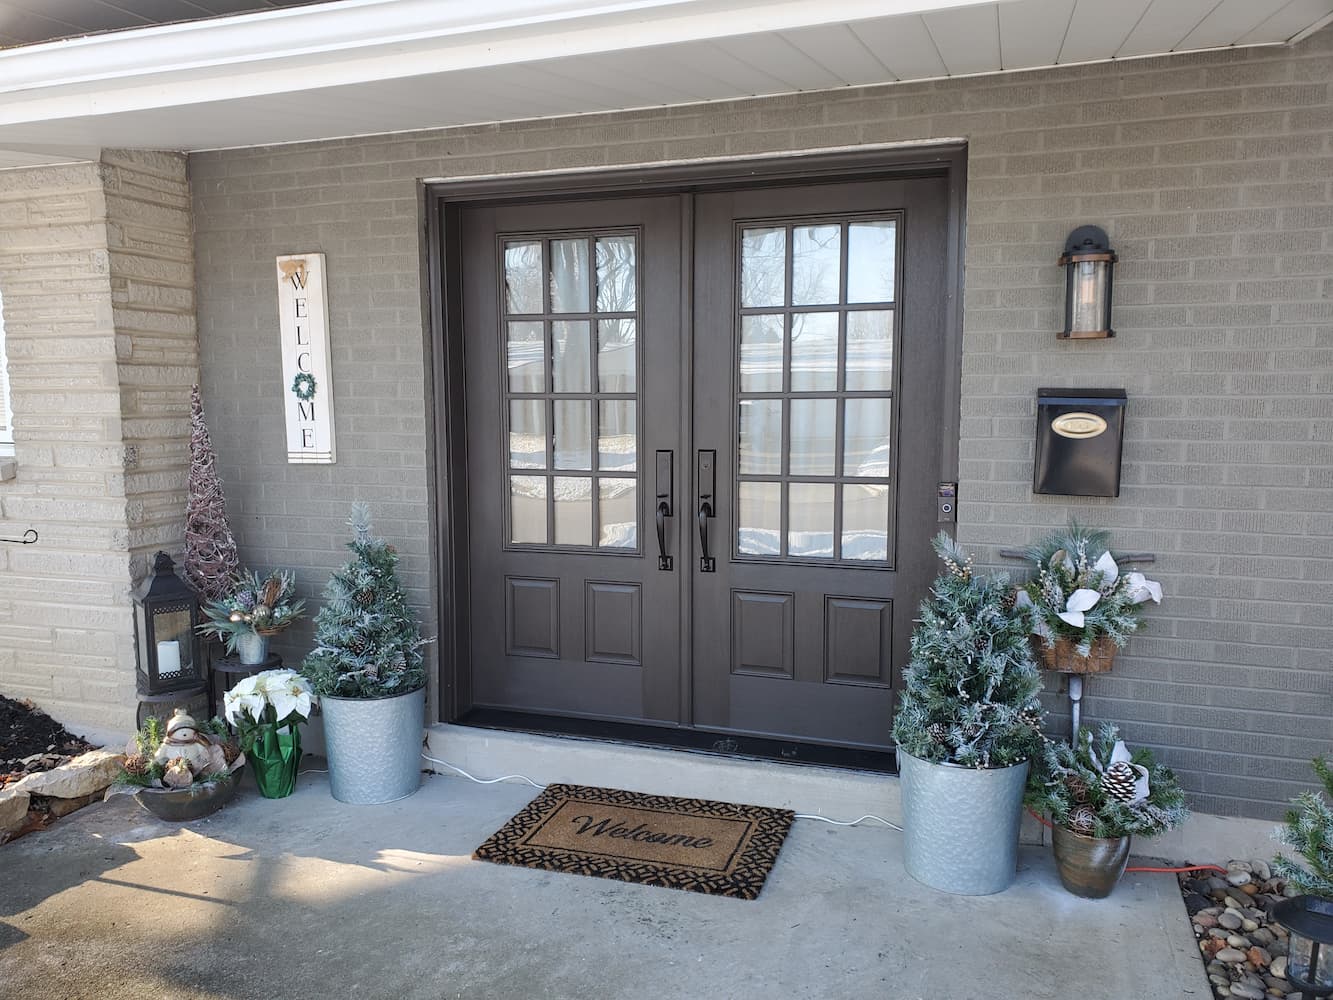 New double doors with glass and grilles on home in Kettering, Ohio